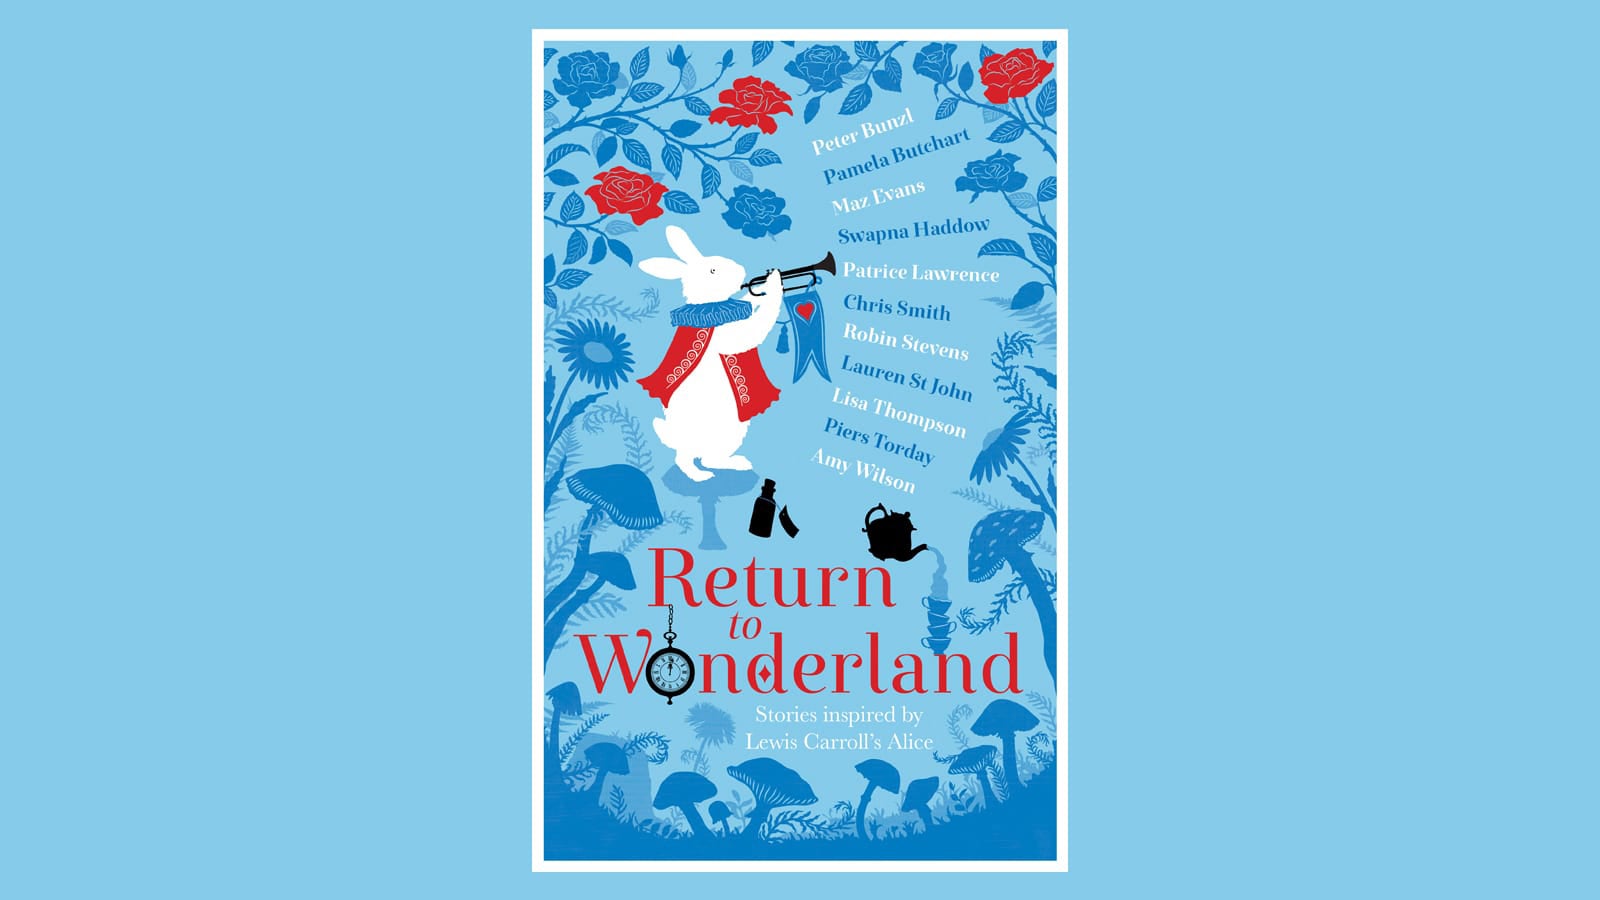 Book cover for the Return to Wonderland - stories inspired by Lewis Carroll